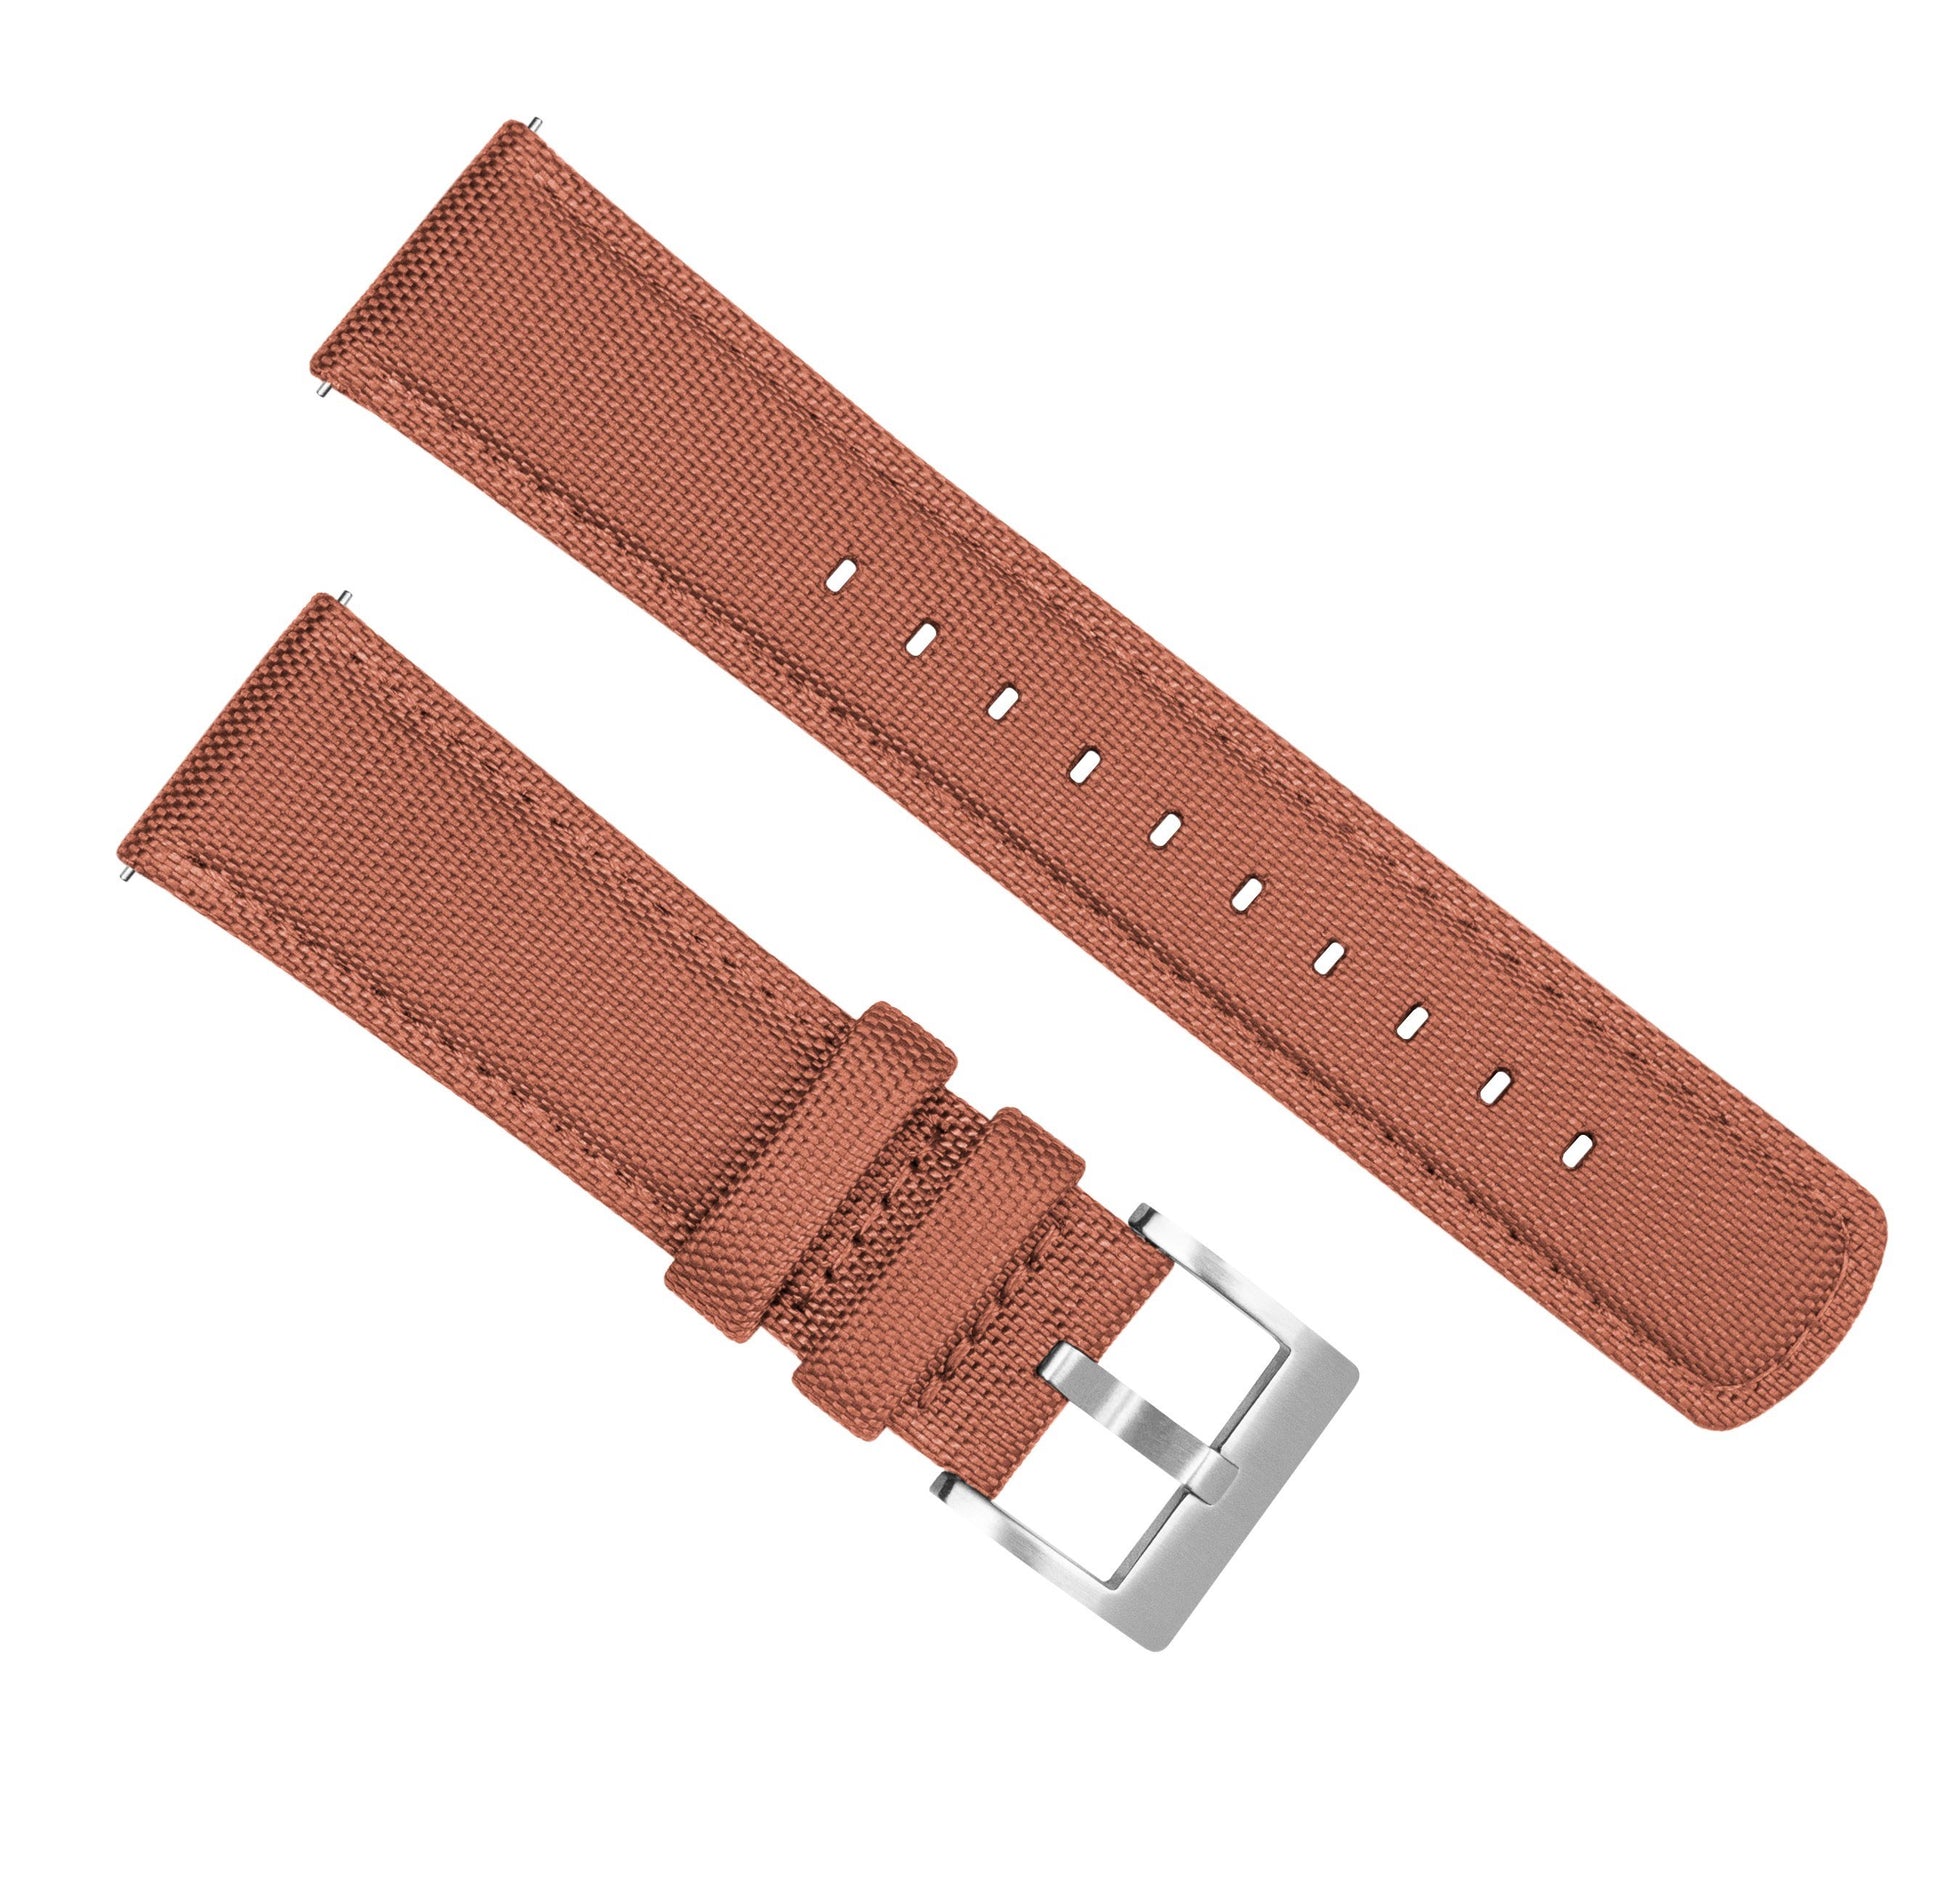 Withings Nokia Activité and Steel HR | Sailcloth Quick Release | Copper Orange - Barton Watch Bands